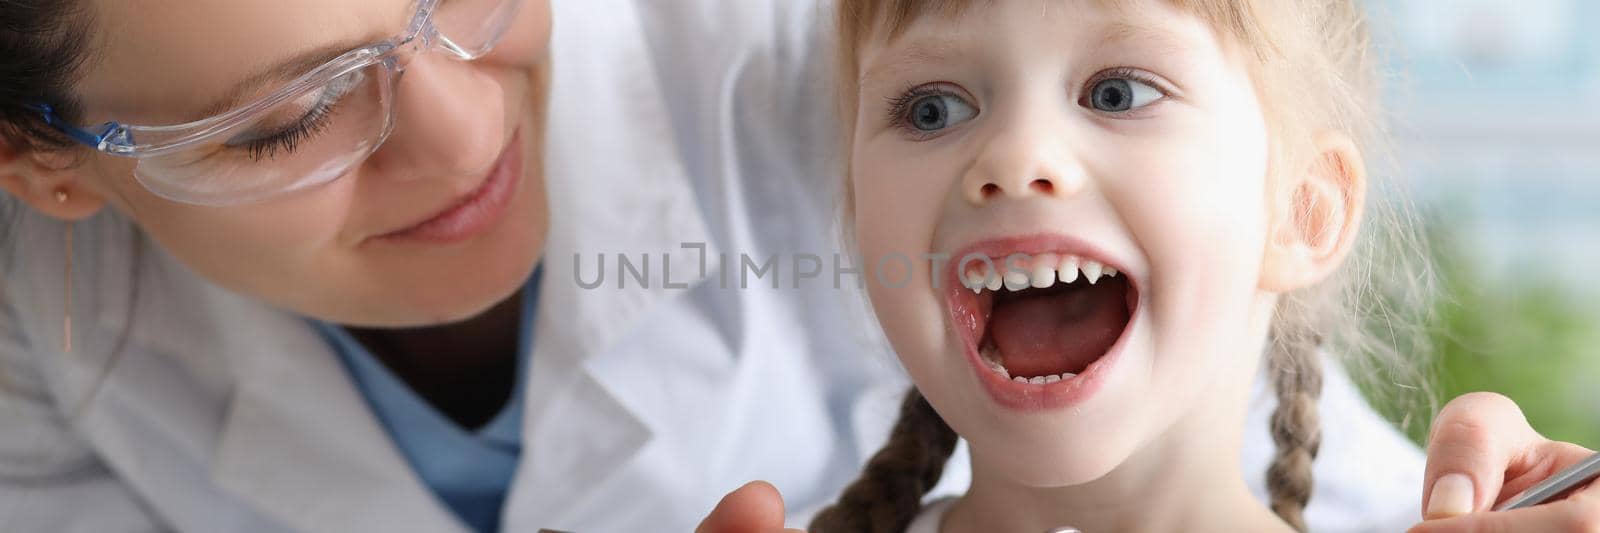 Child visiting family doctor, pediatrician with tool check throat, girl open mouth wide by kuprevich